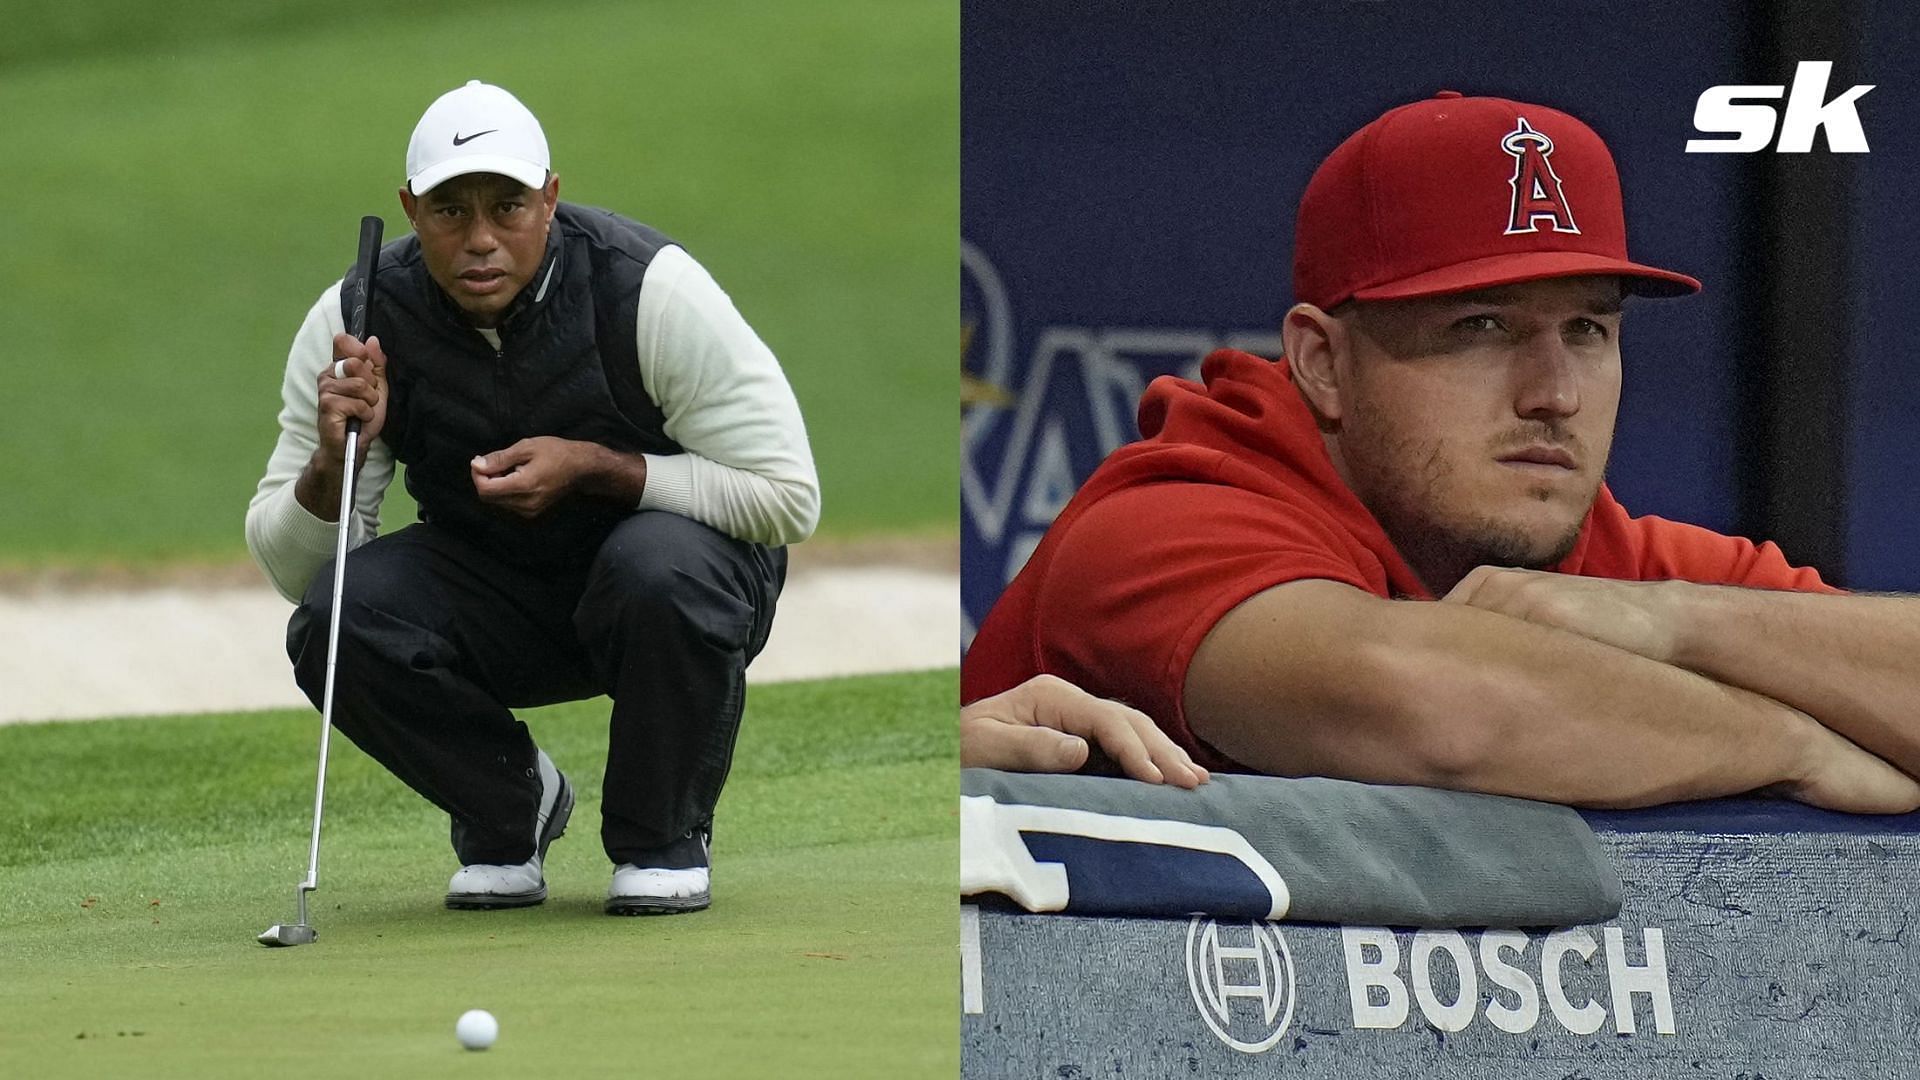 Mike Trout is one of many celebrities who have invested in Tiger Woods